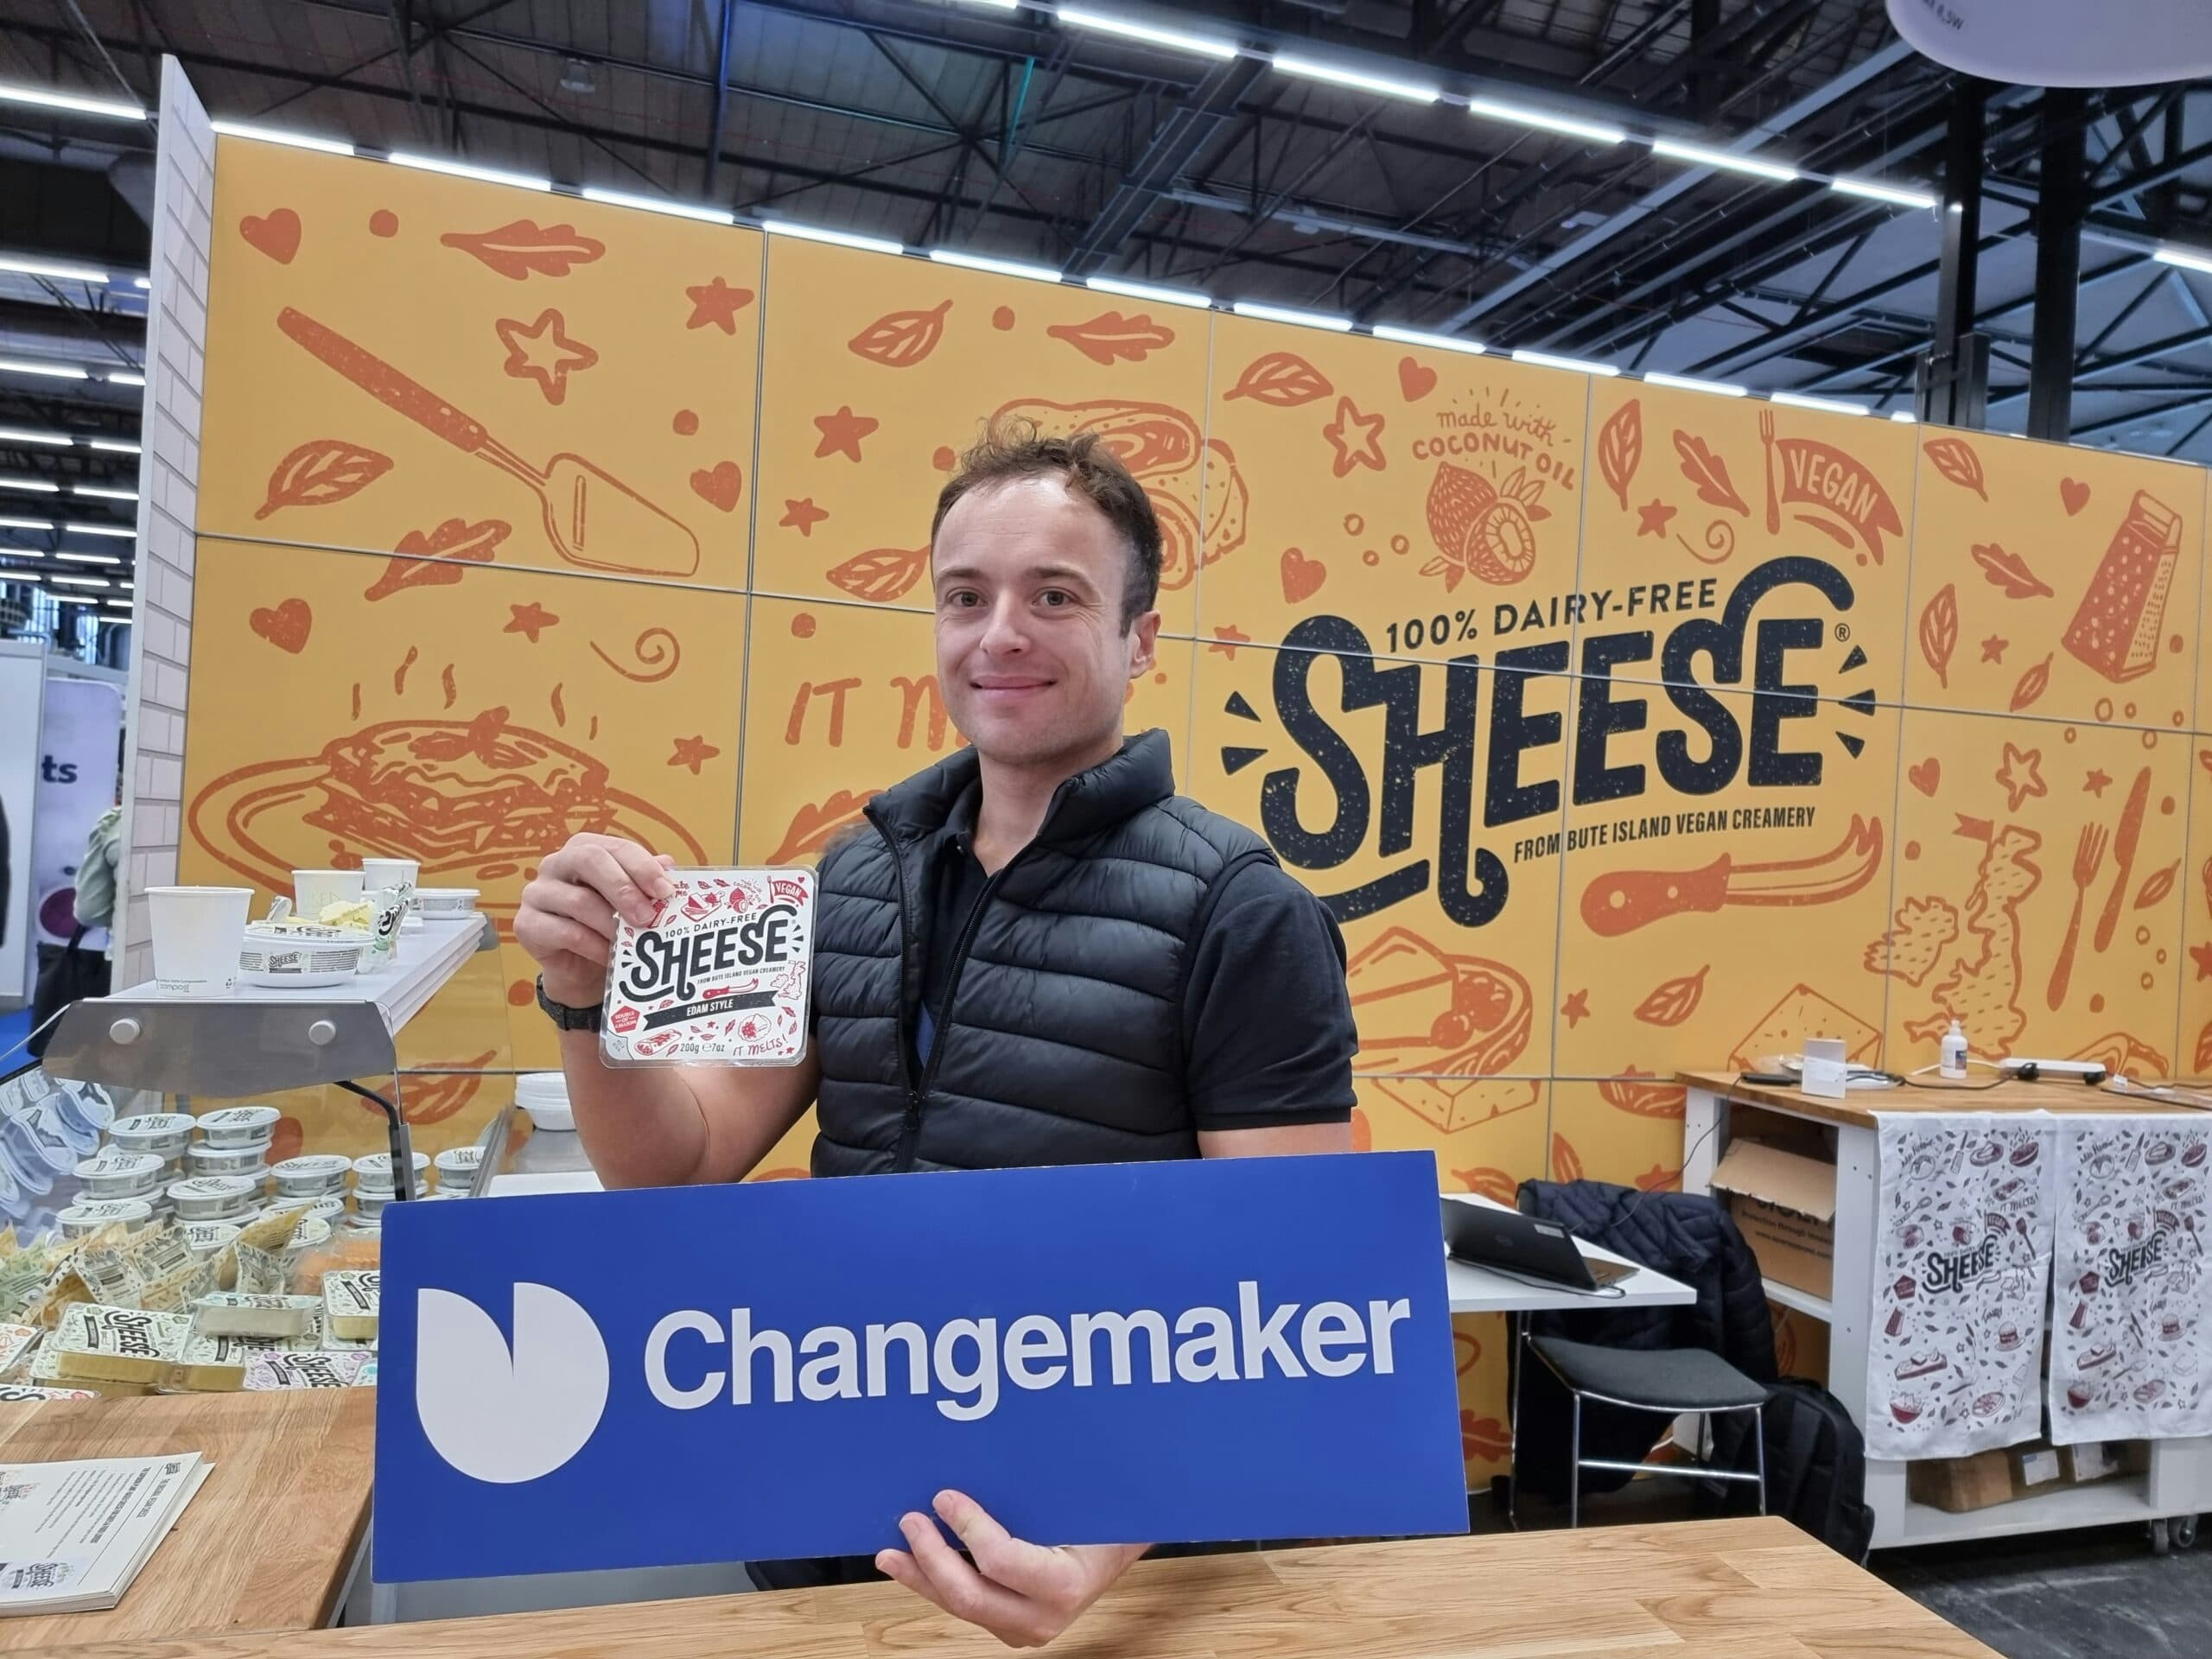 #Changemaker: From Scotland, the award-winning vegan cheese that is taking the market by storm